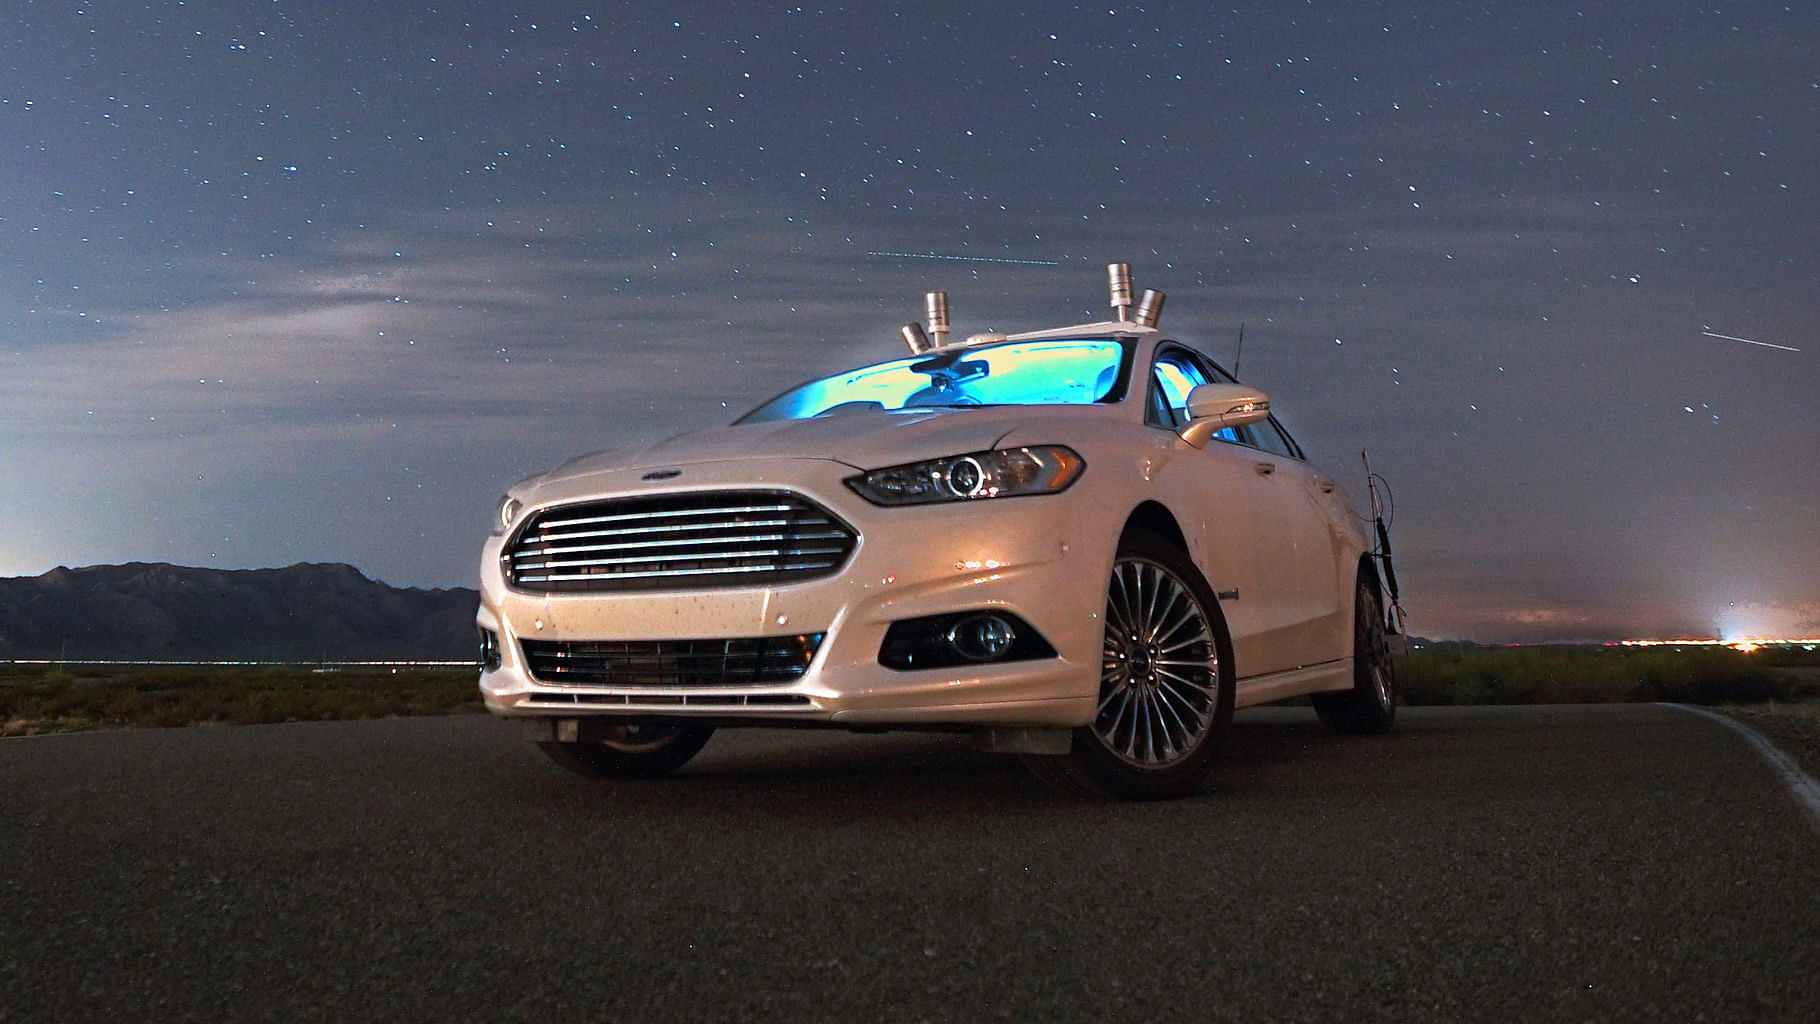 

Ford’s autonomous driving vehicle. (Photo Courtesy: <a href="https://media.ford.com/content/fordmedia/fna/us/en/multimedia.html">Ford</a>)